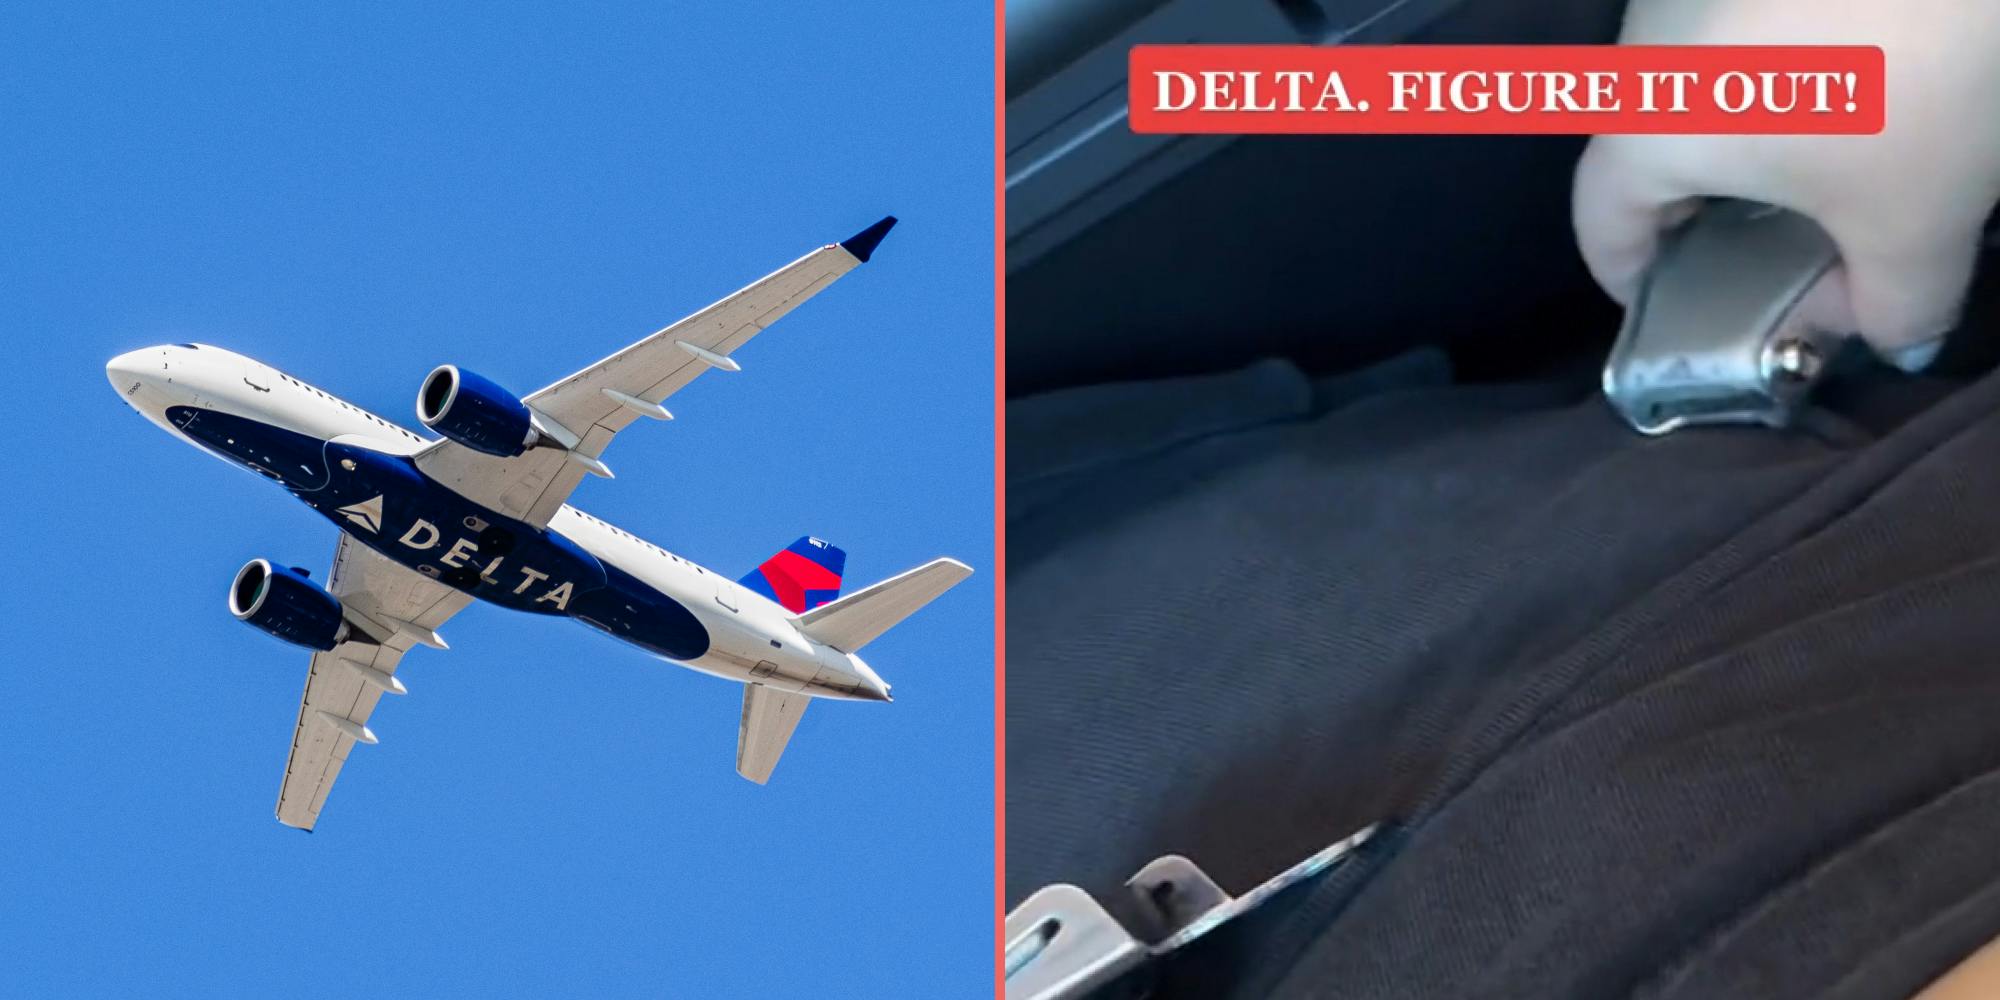 Delta airplane in sky (l) Woman in plane seatbelt does not fit caption "DELTA. FIGURE IT OUT!" (r)